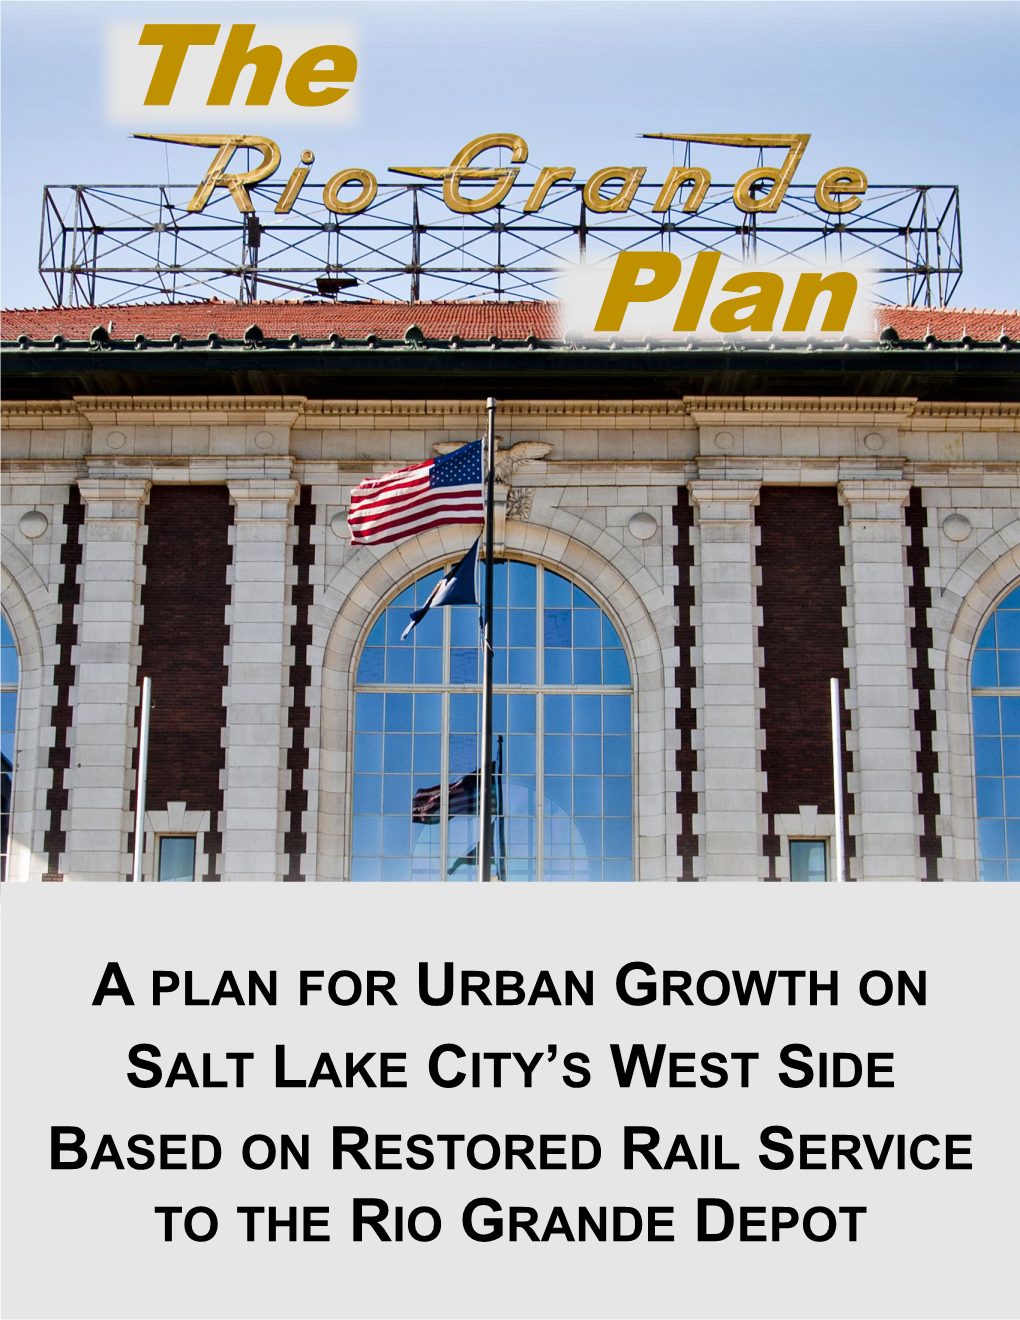 A Plan for Urban Growth on Salt Lake City's West Side Based on Restored Rail Service to the Rio Grande Depot